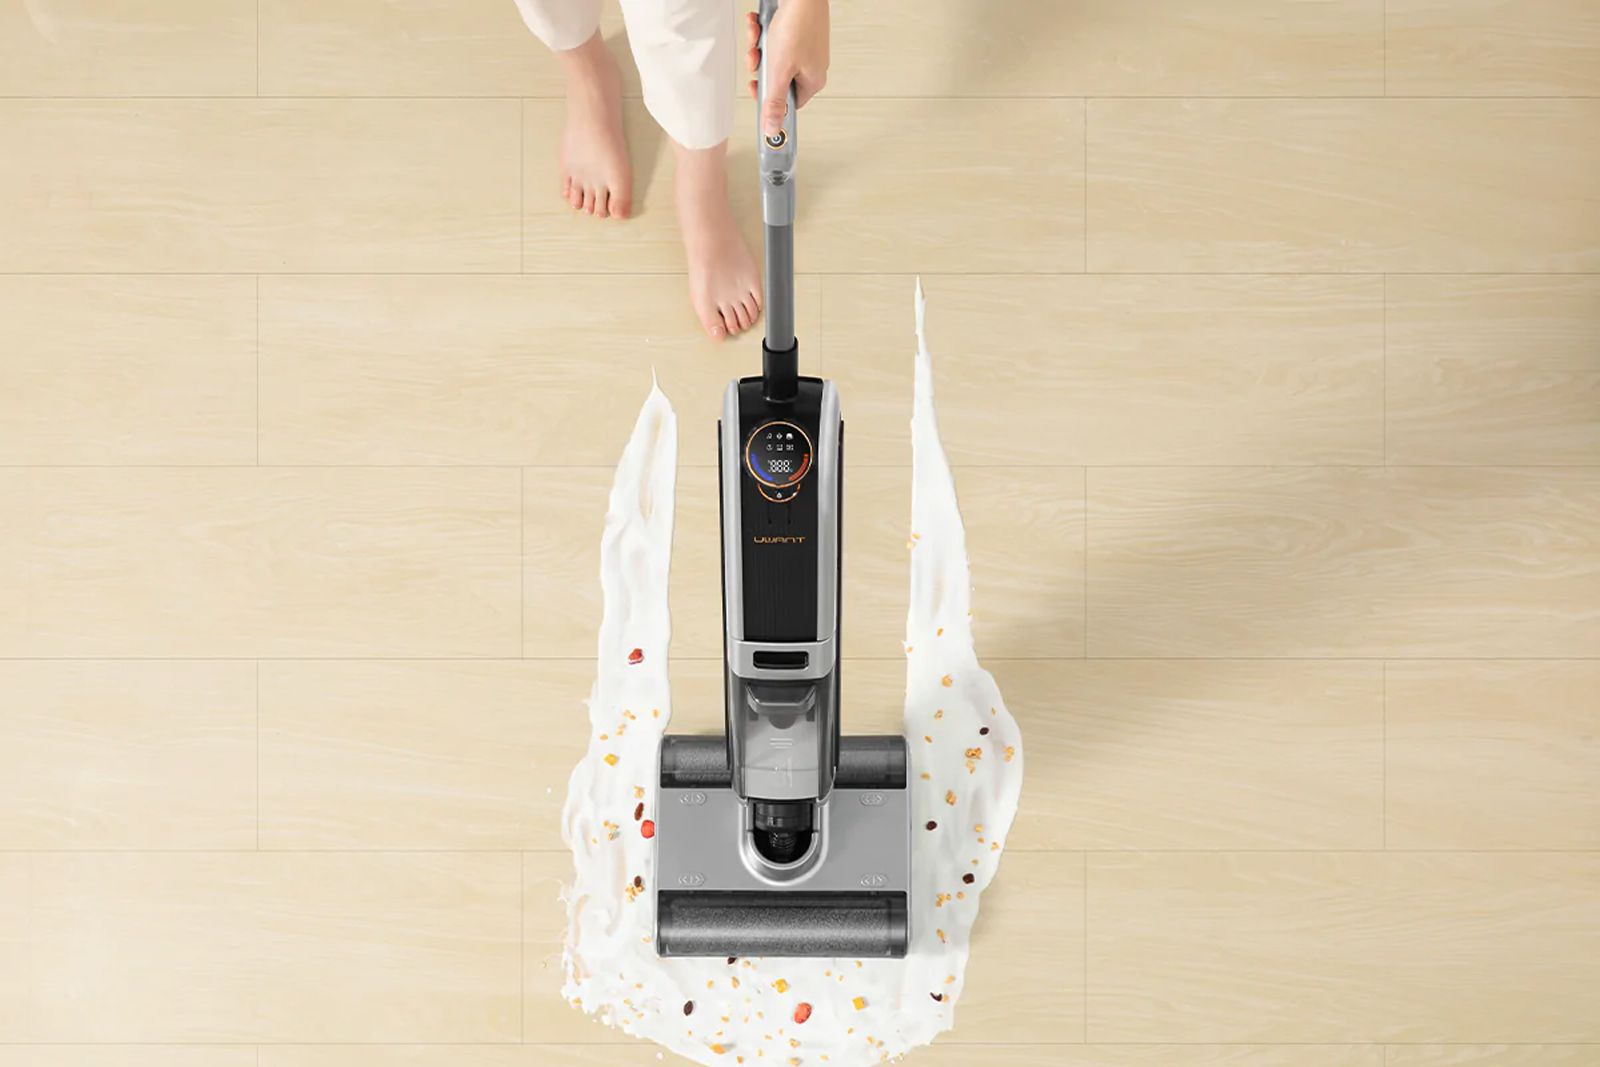 Claim a massive discount on the UWANT X100 cordless all-in-one smart floor cleaner photo 1